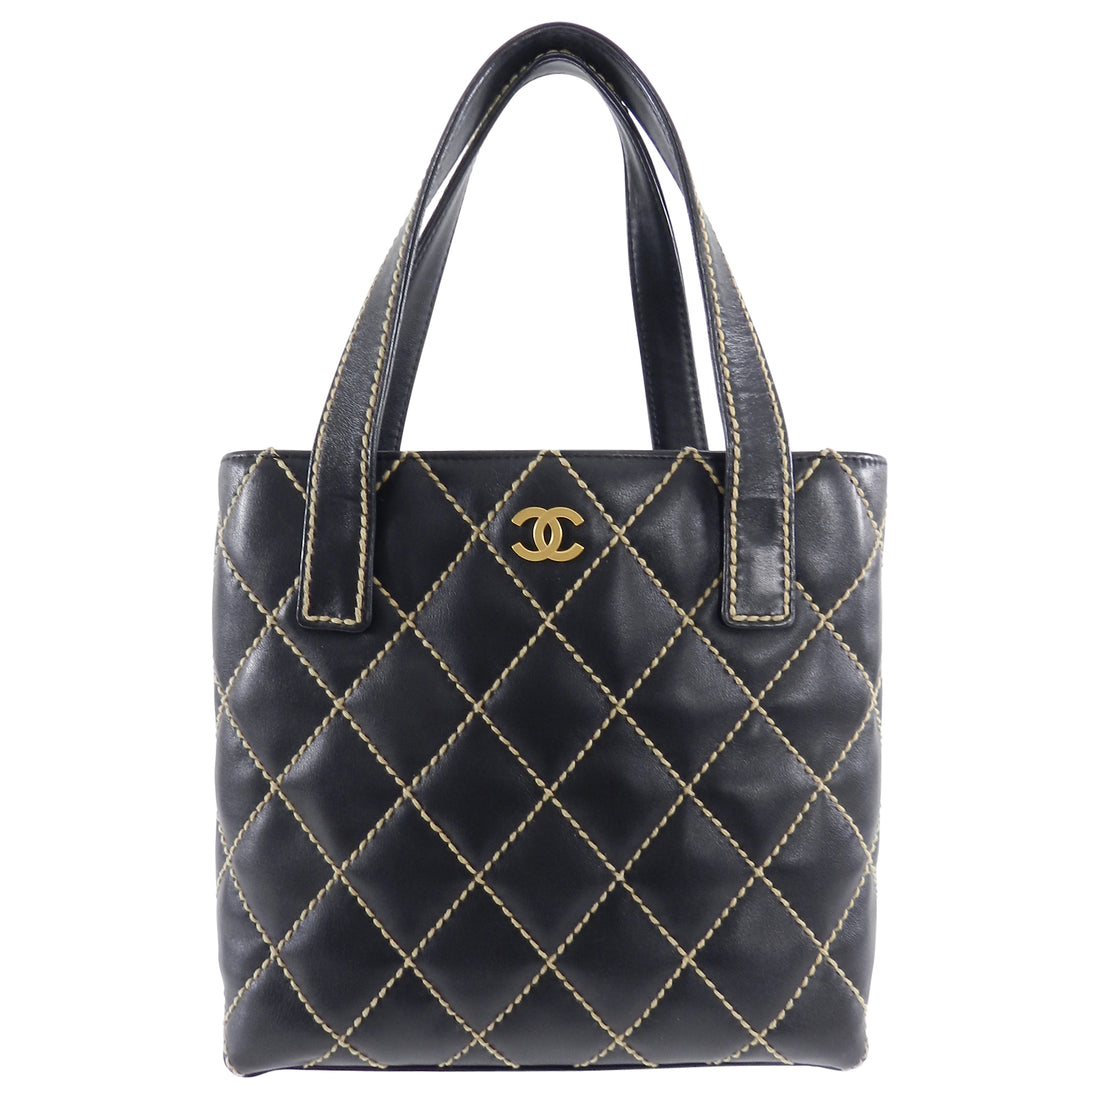 Chanel - Authenticated Wild Stitch Handbag - Leather Black Plain for Women, Very Good Condition